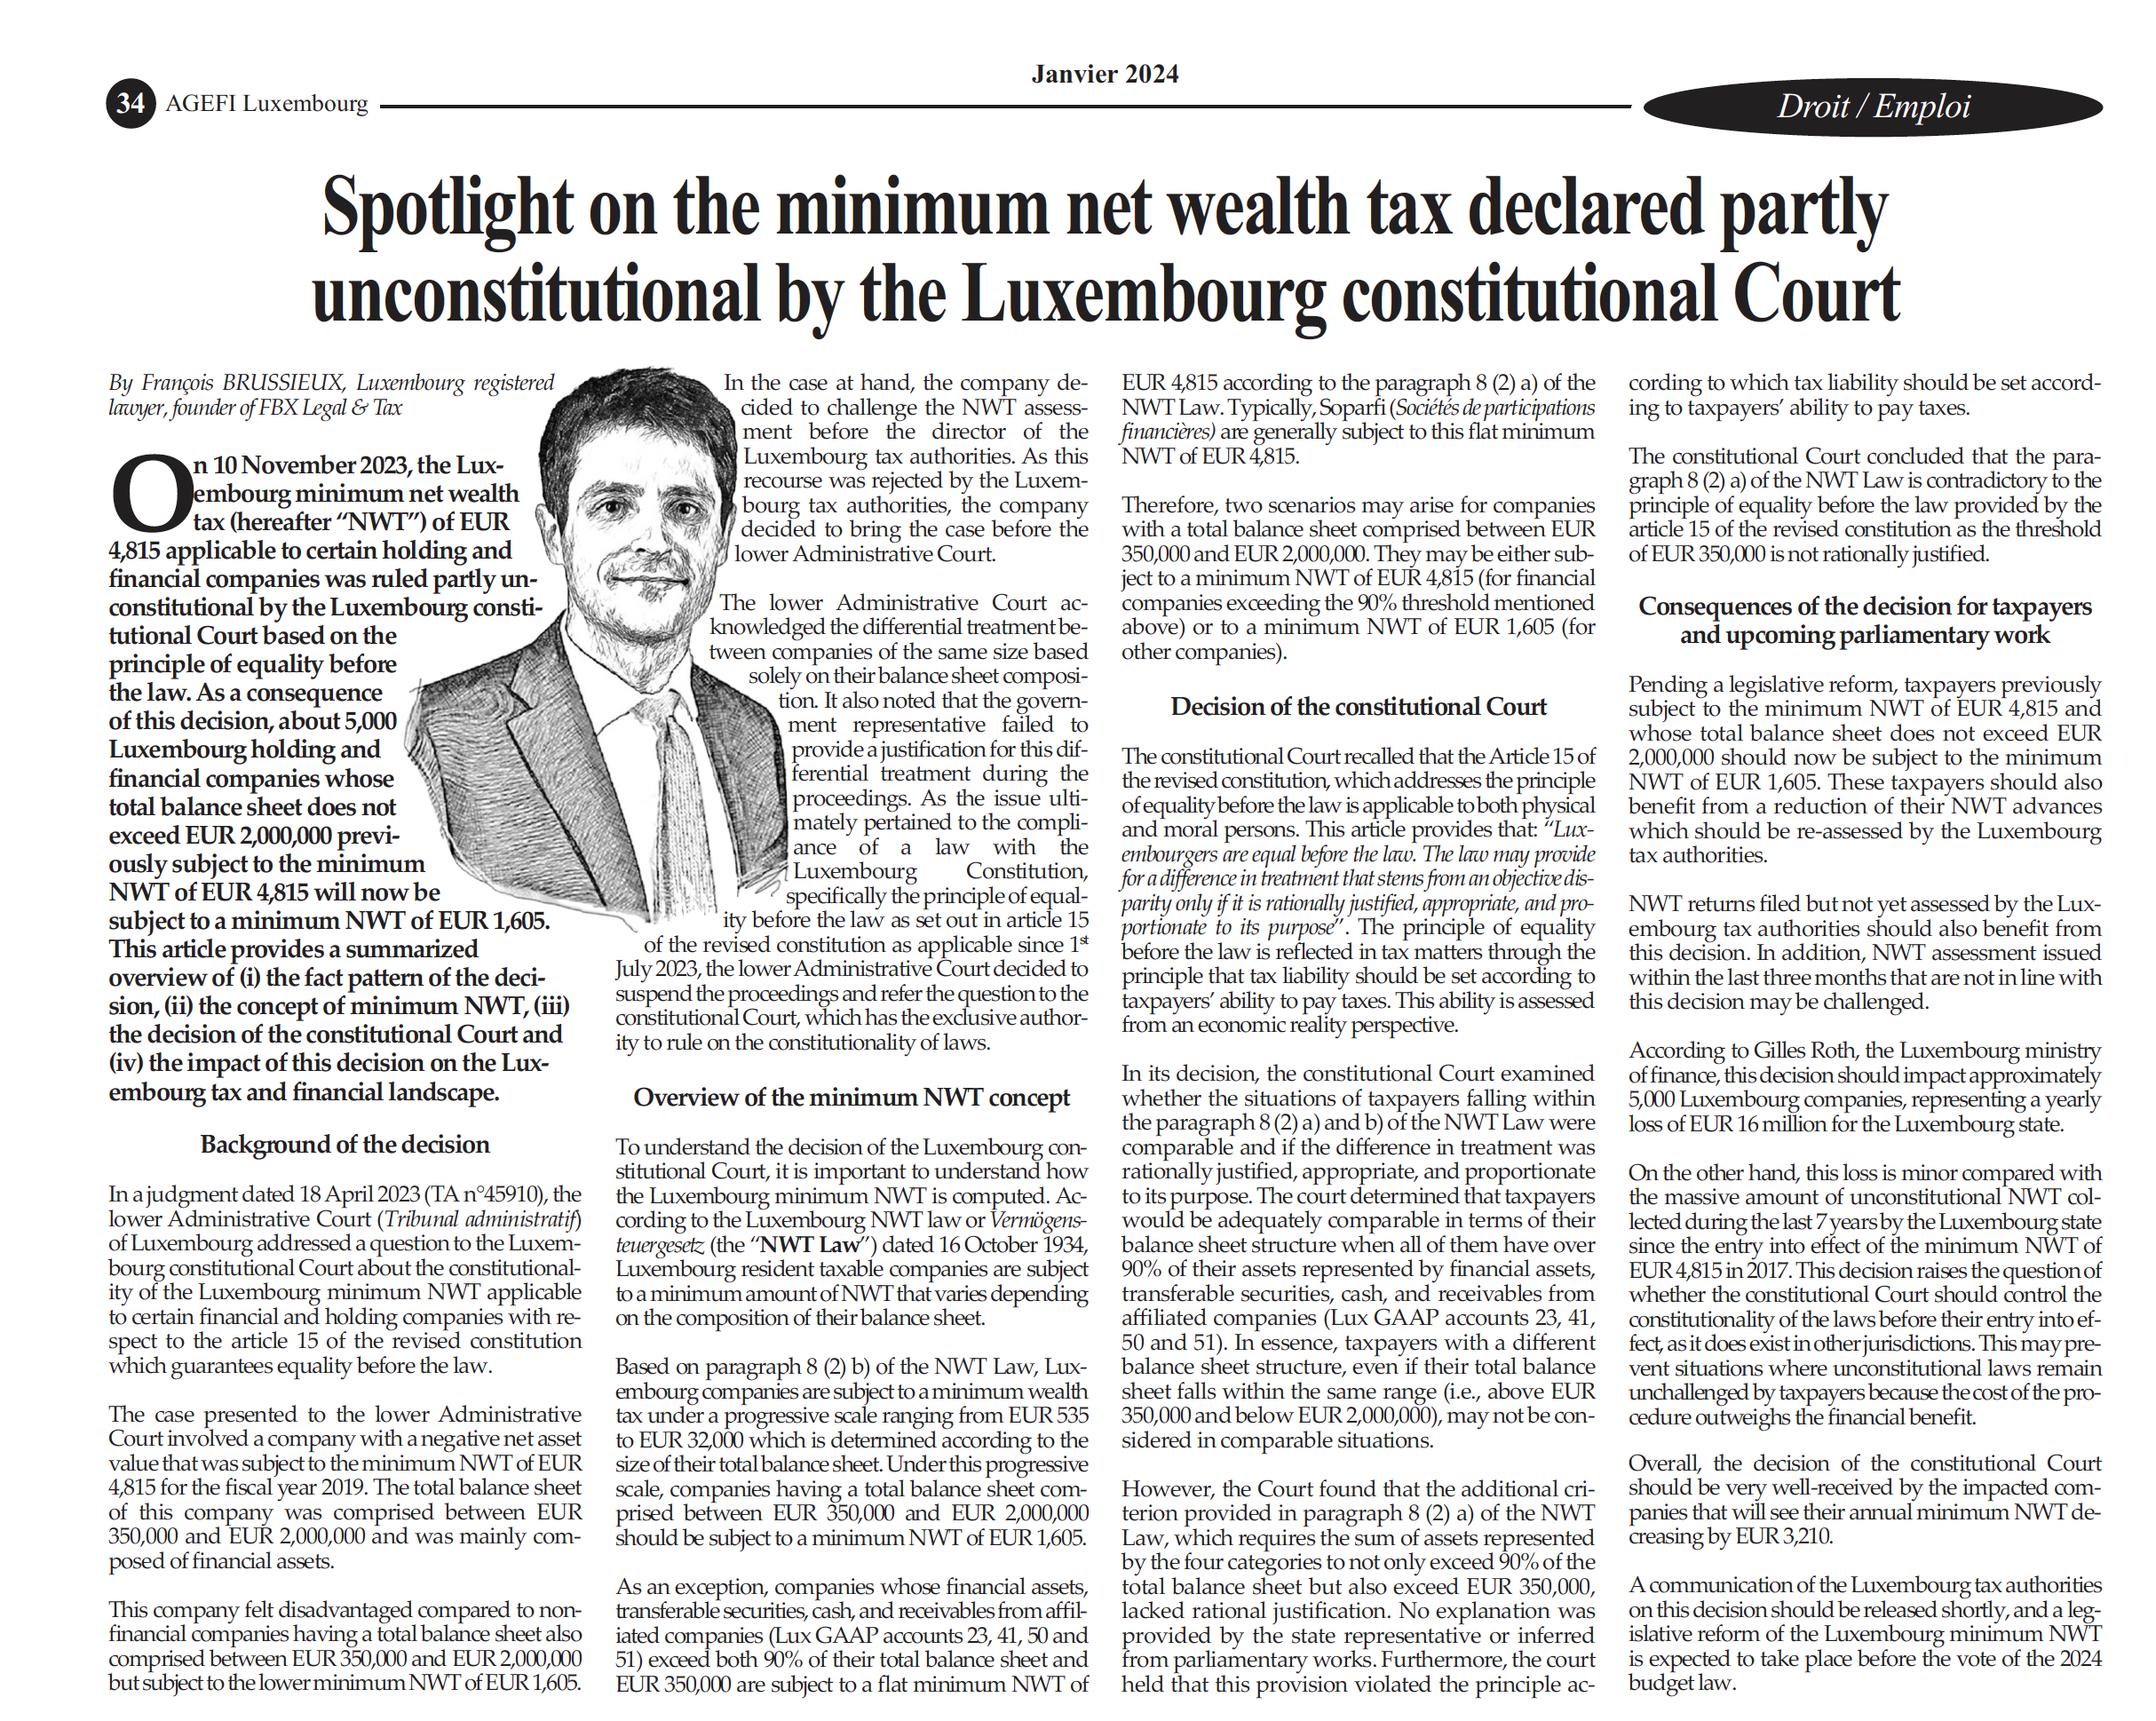 Spotlight on the minimum net wealth tax declared partly unconstitutional by the Luxembourg constitutional Court